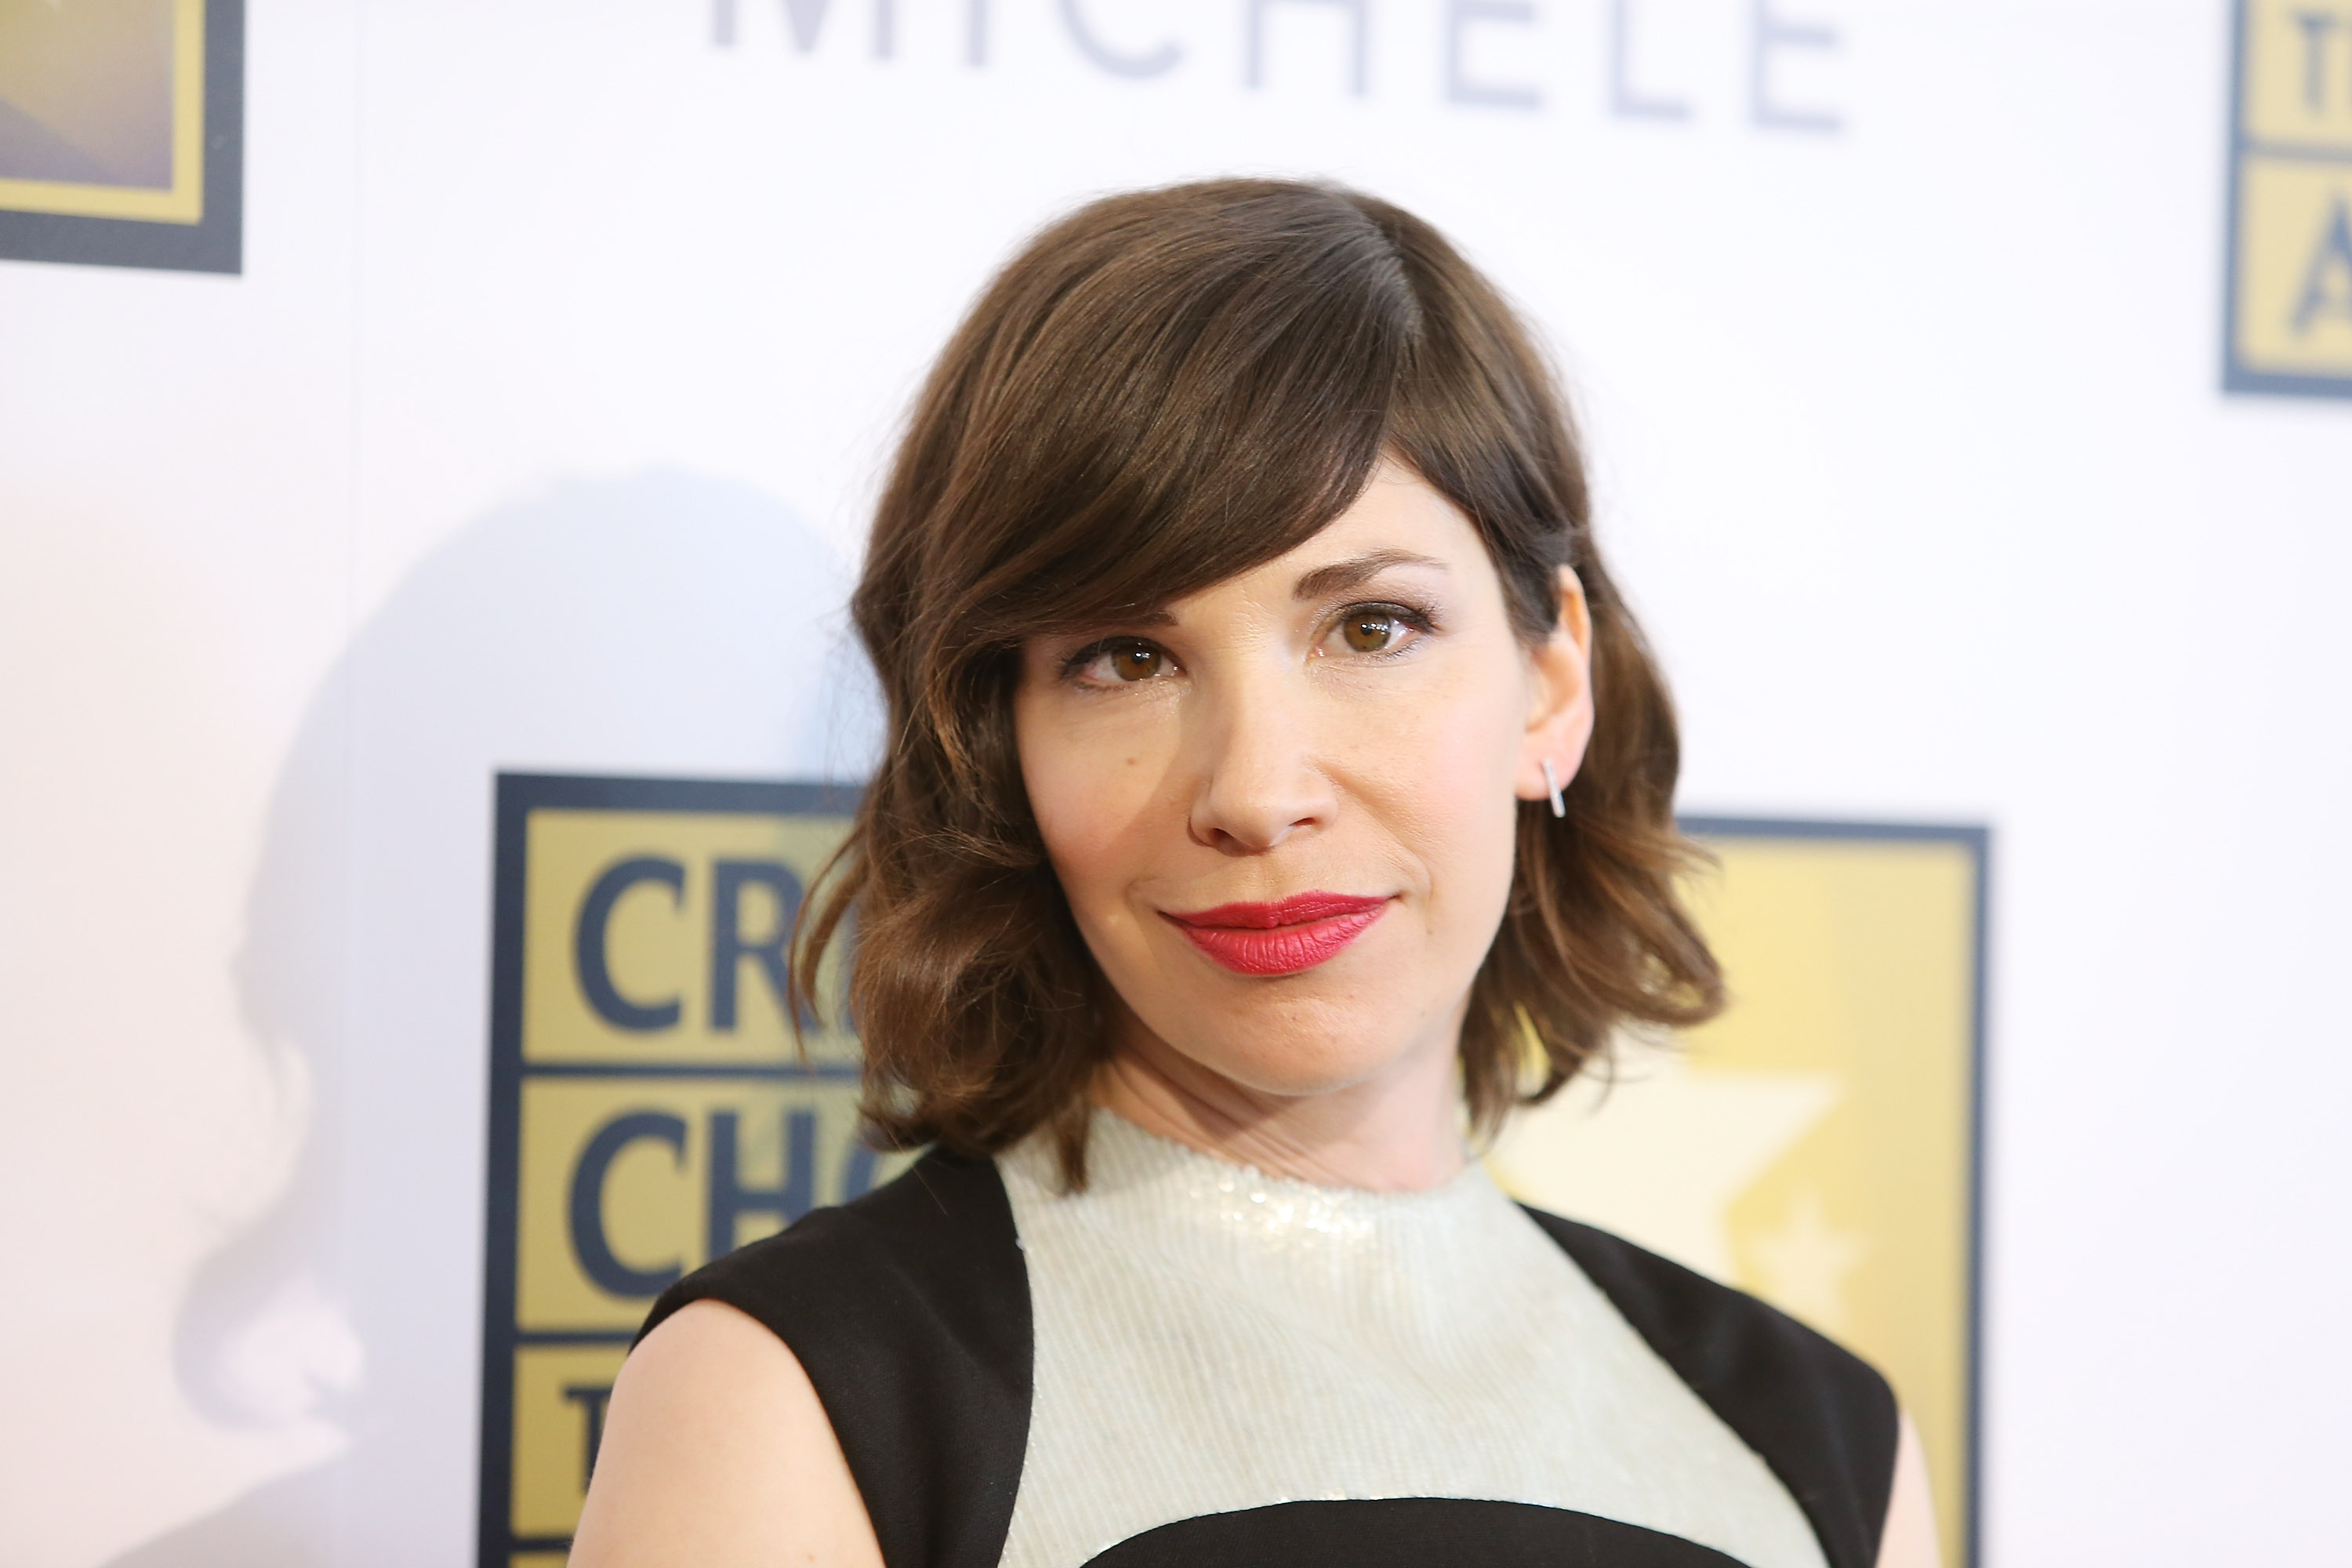 Carrie Brownstein attends the press room at the 4th Annual Critics' Choice Television Awards held at The Beverly Hilton Hotel on June 19, 2014 in Beverly Hills, California. (Michael Tran--FilmMagic)